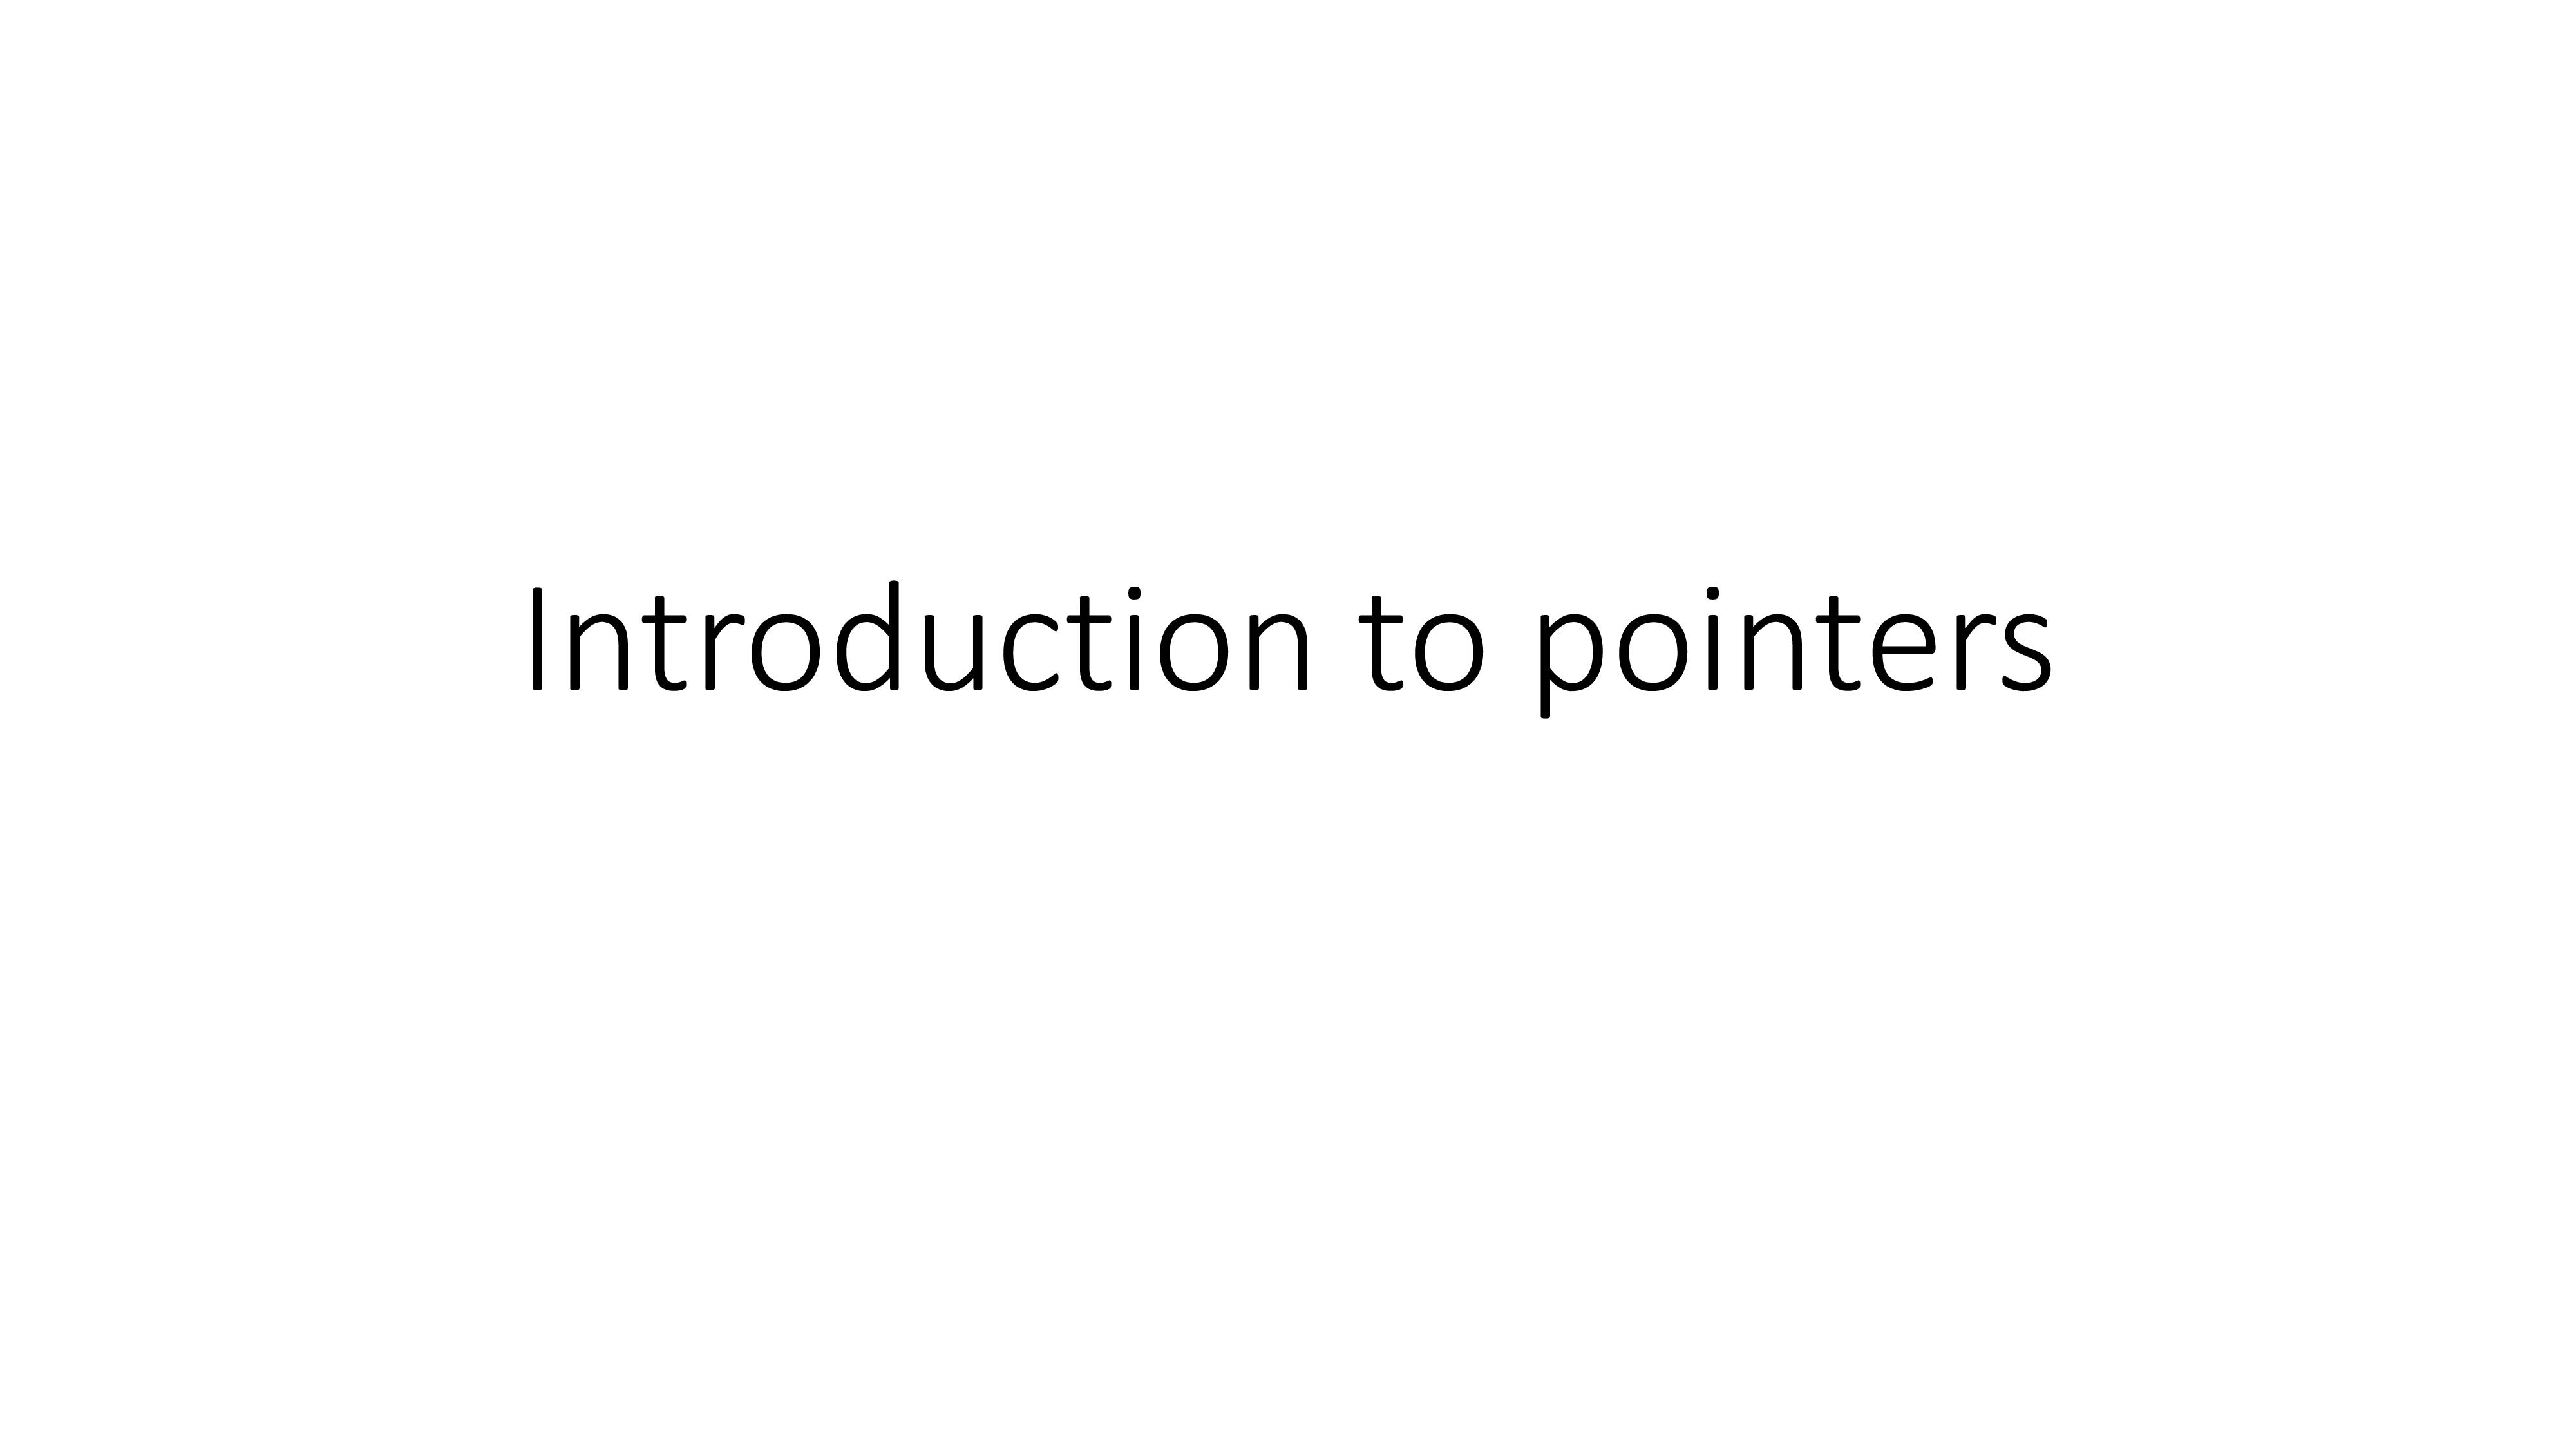 Notes on pointers c++